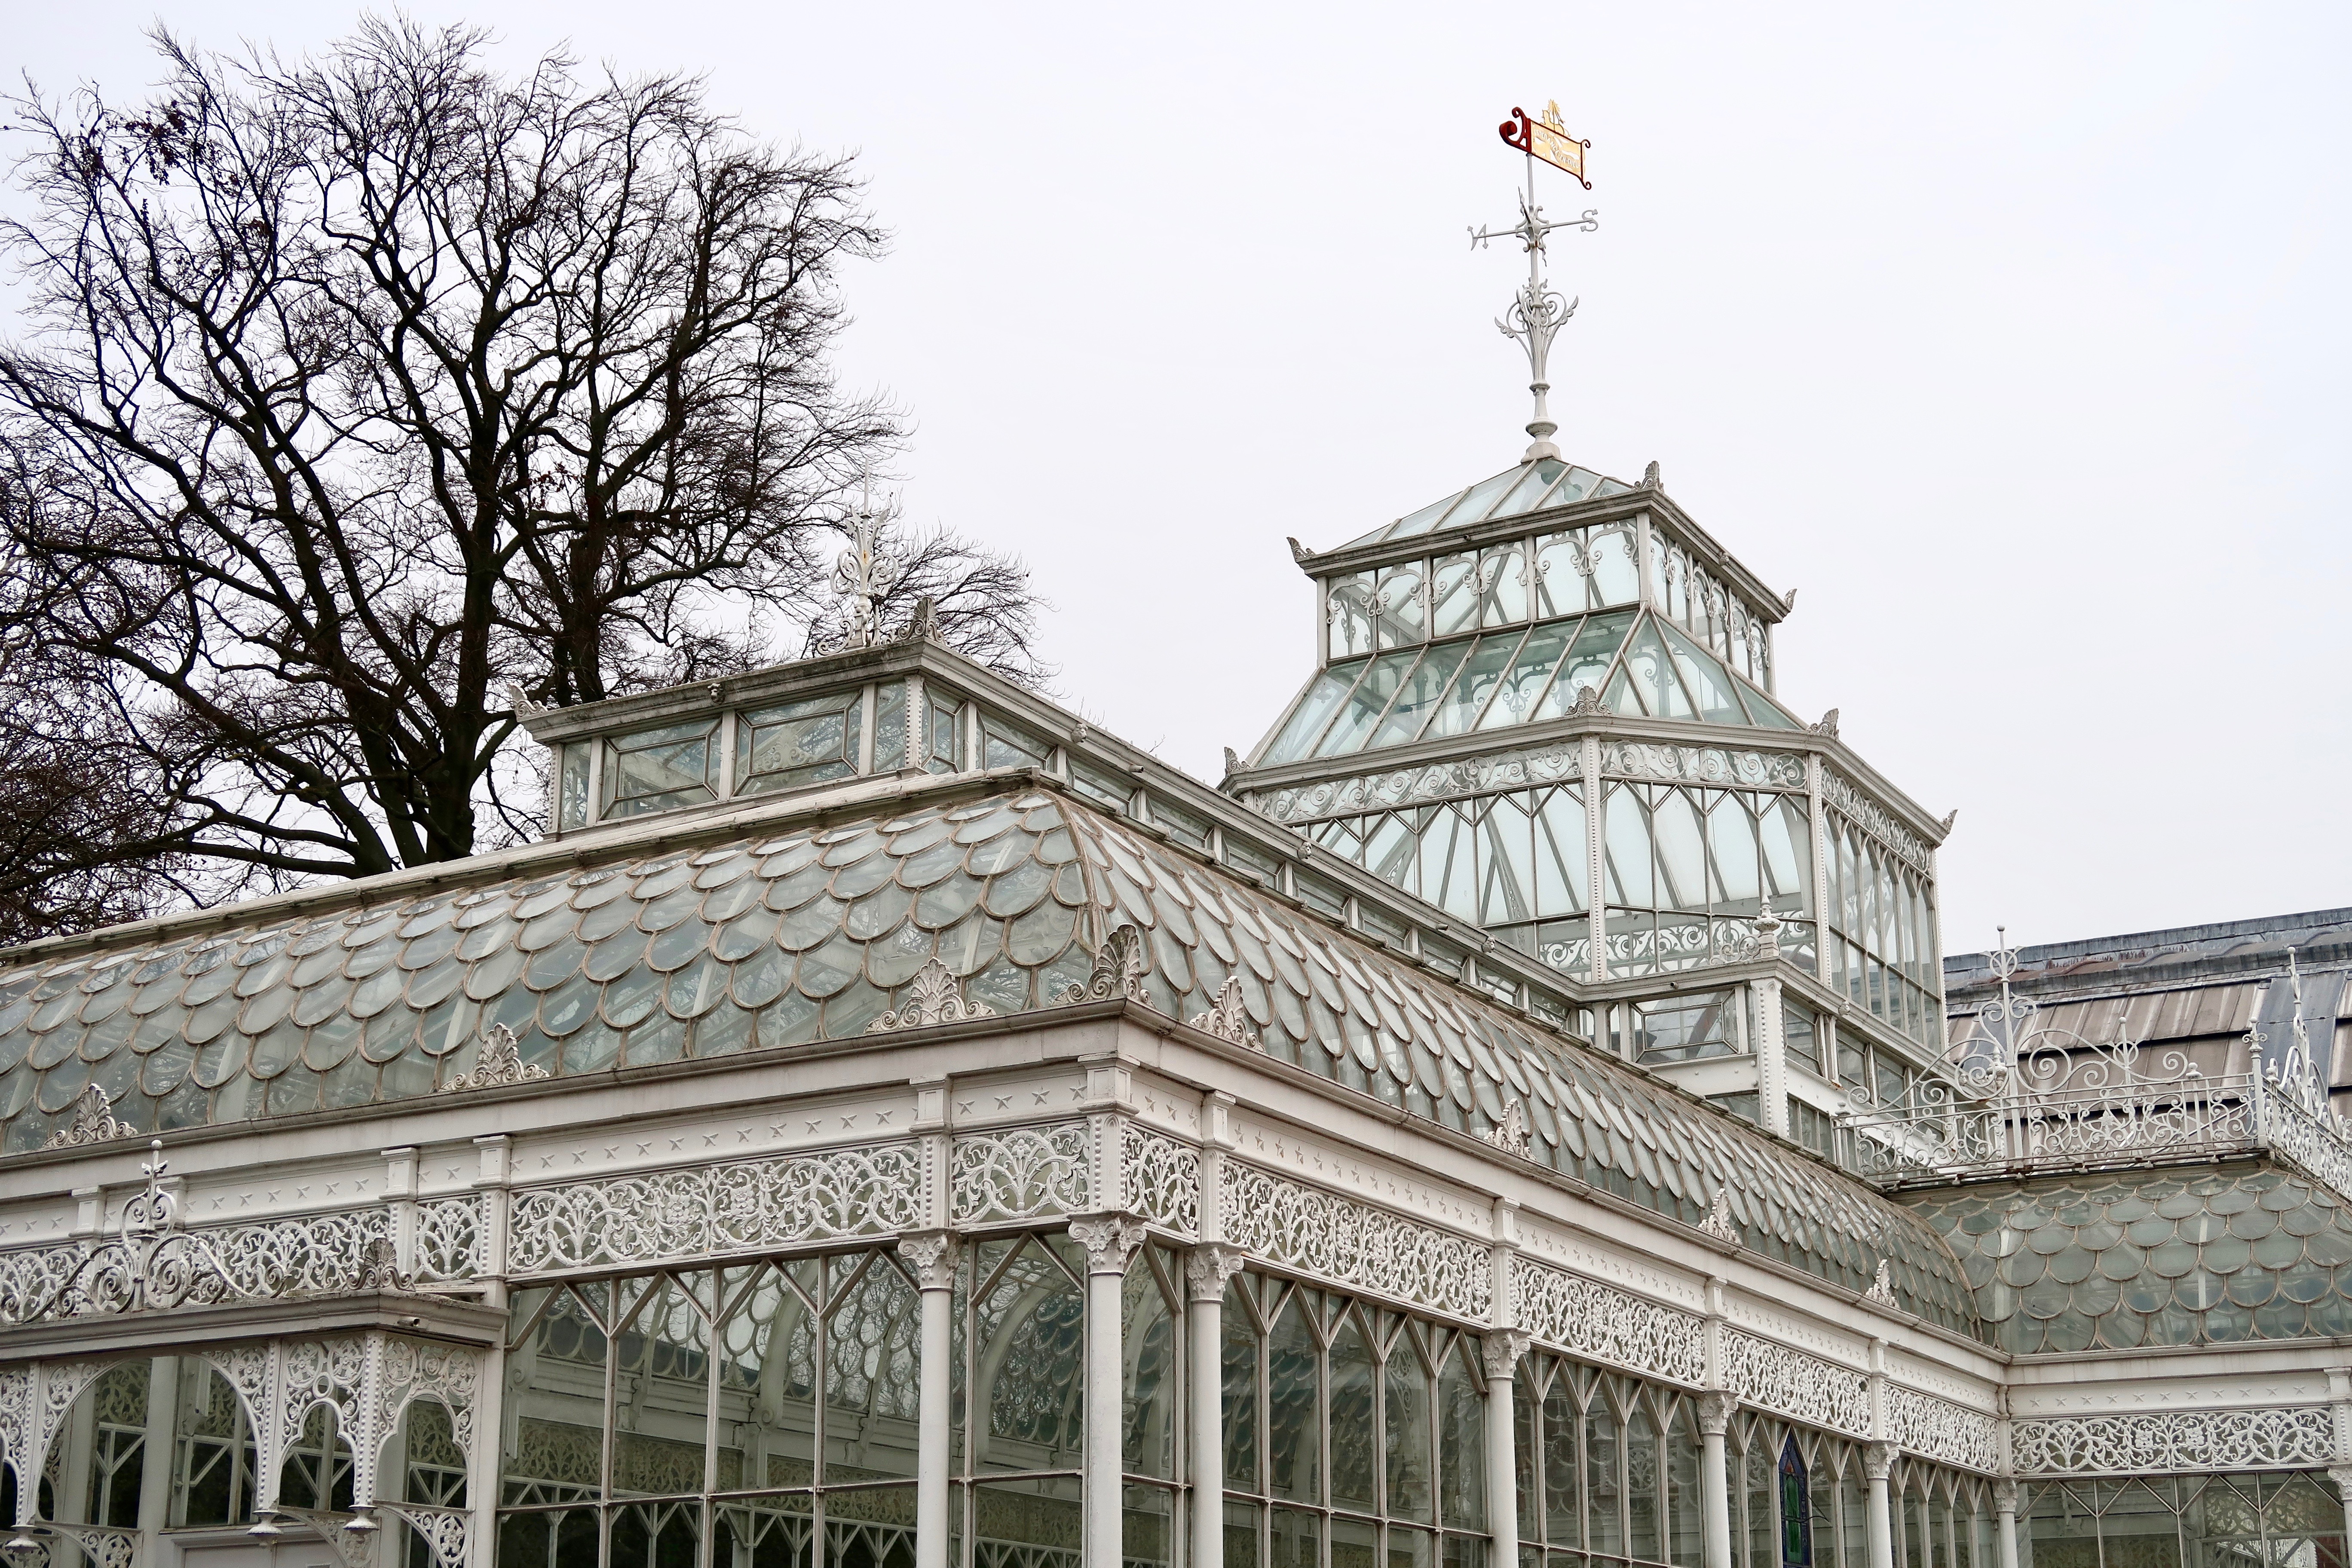 The Horniman Museum conservatory